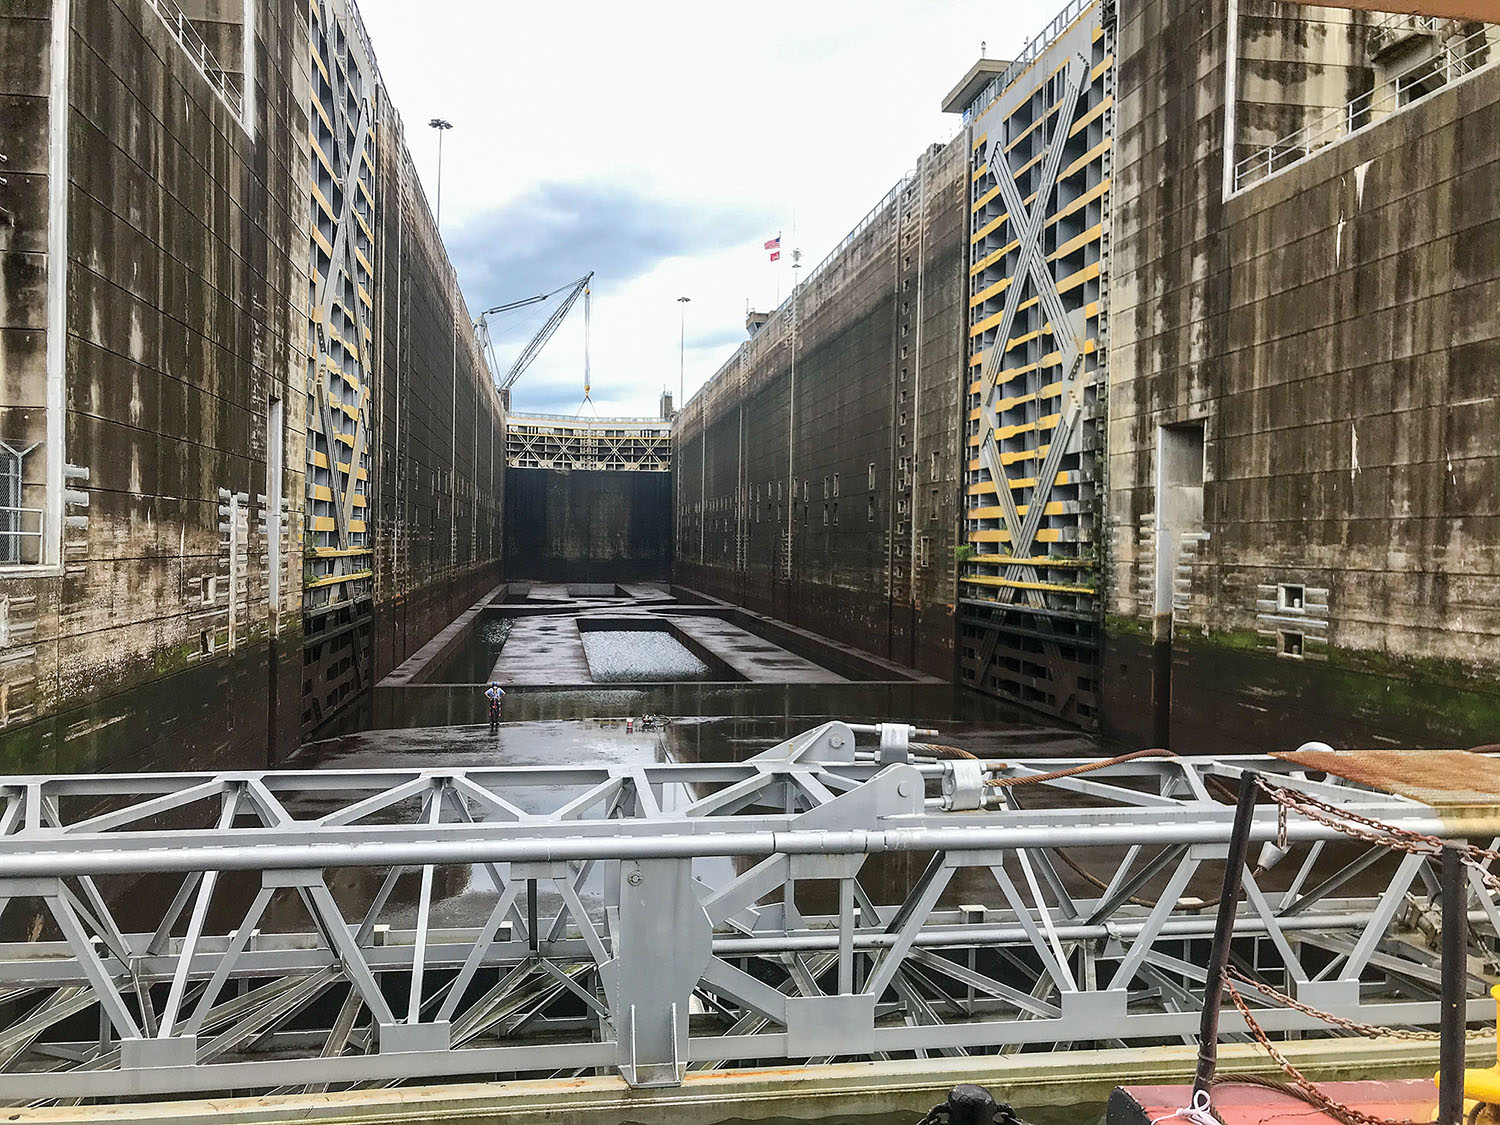 Jamie Whitten Lock during its closure and dewatering earlier this summer. (Photo courtesy of Mobile Engineer District)